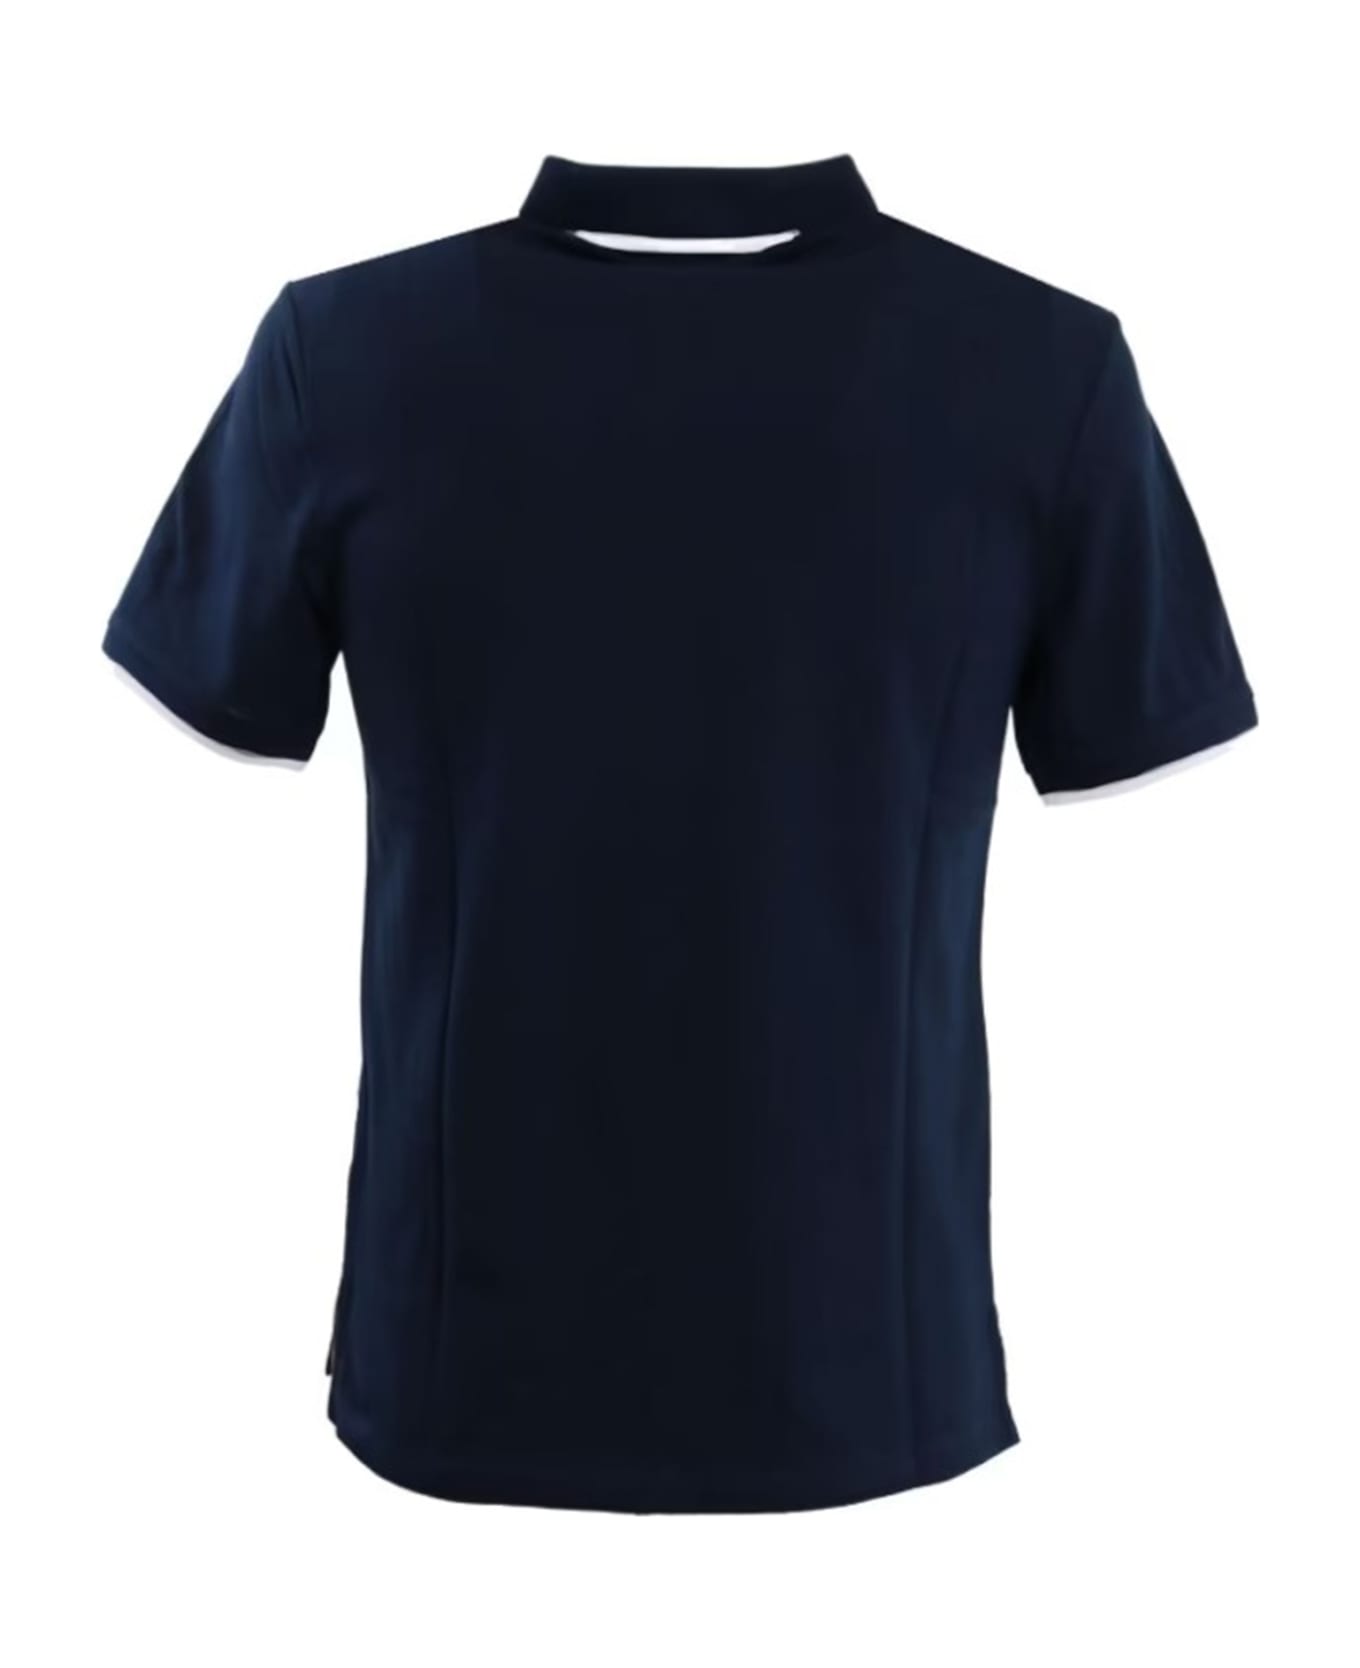 Blauer Navy Blue Short-sleeved Polo Shirt With Inserts - Blu